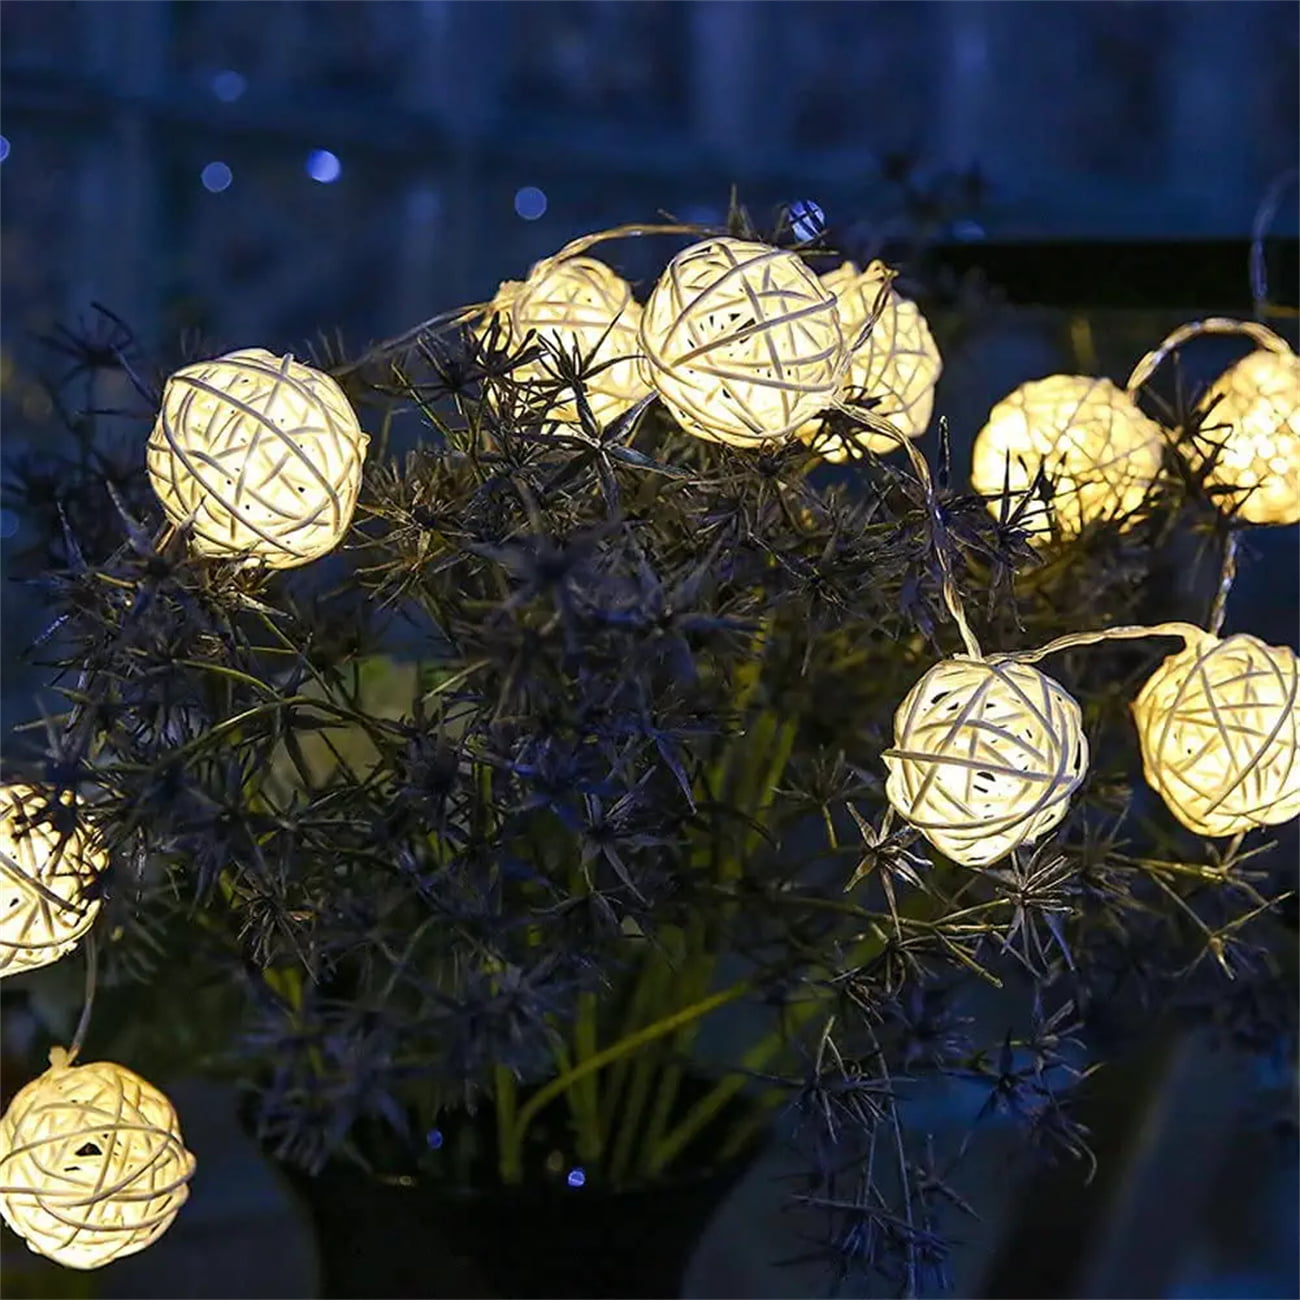 Le Battery Powered LED Globe String Lights Ball Fairy Lights with R